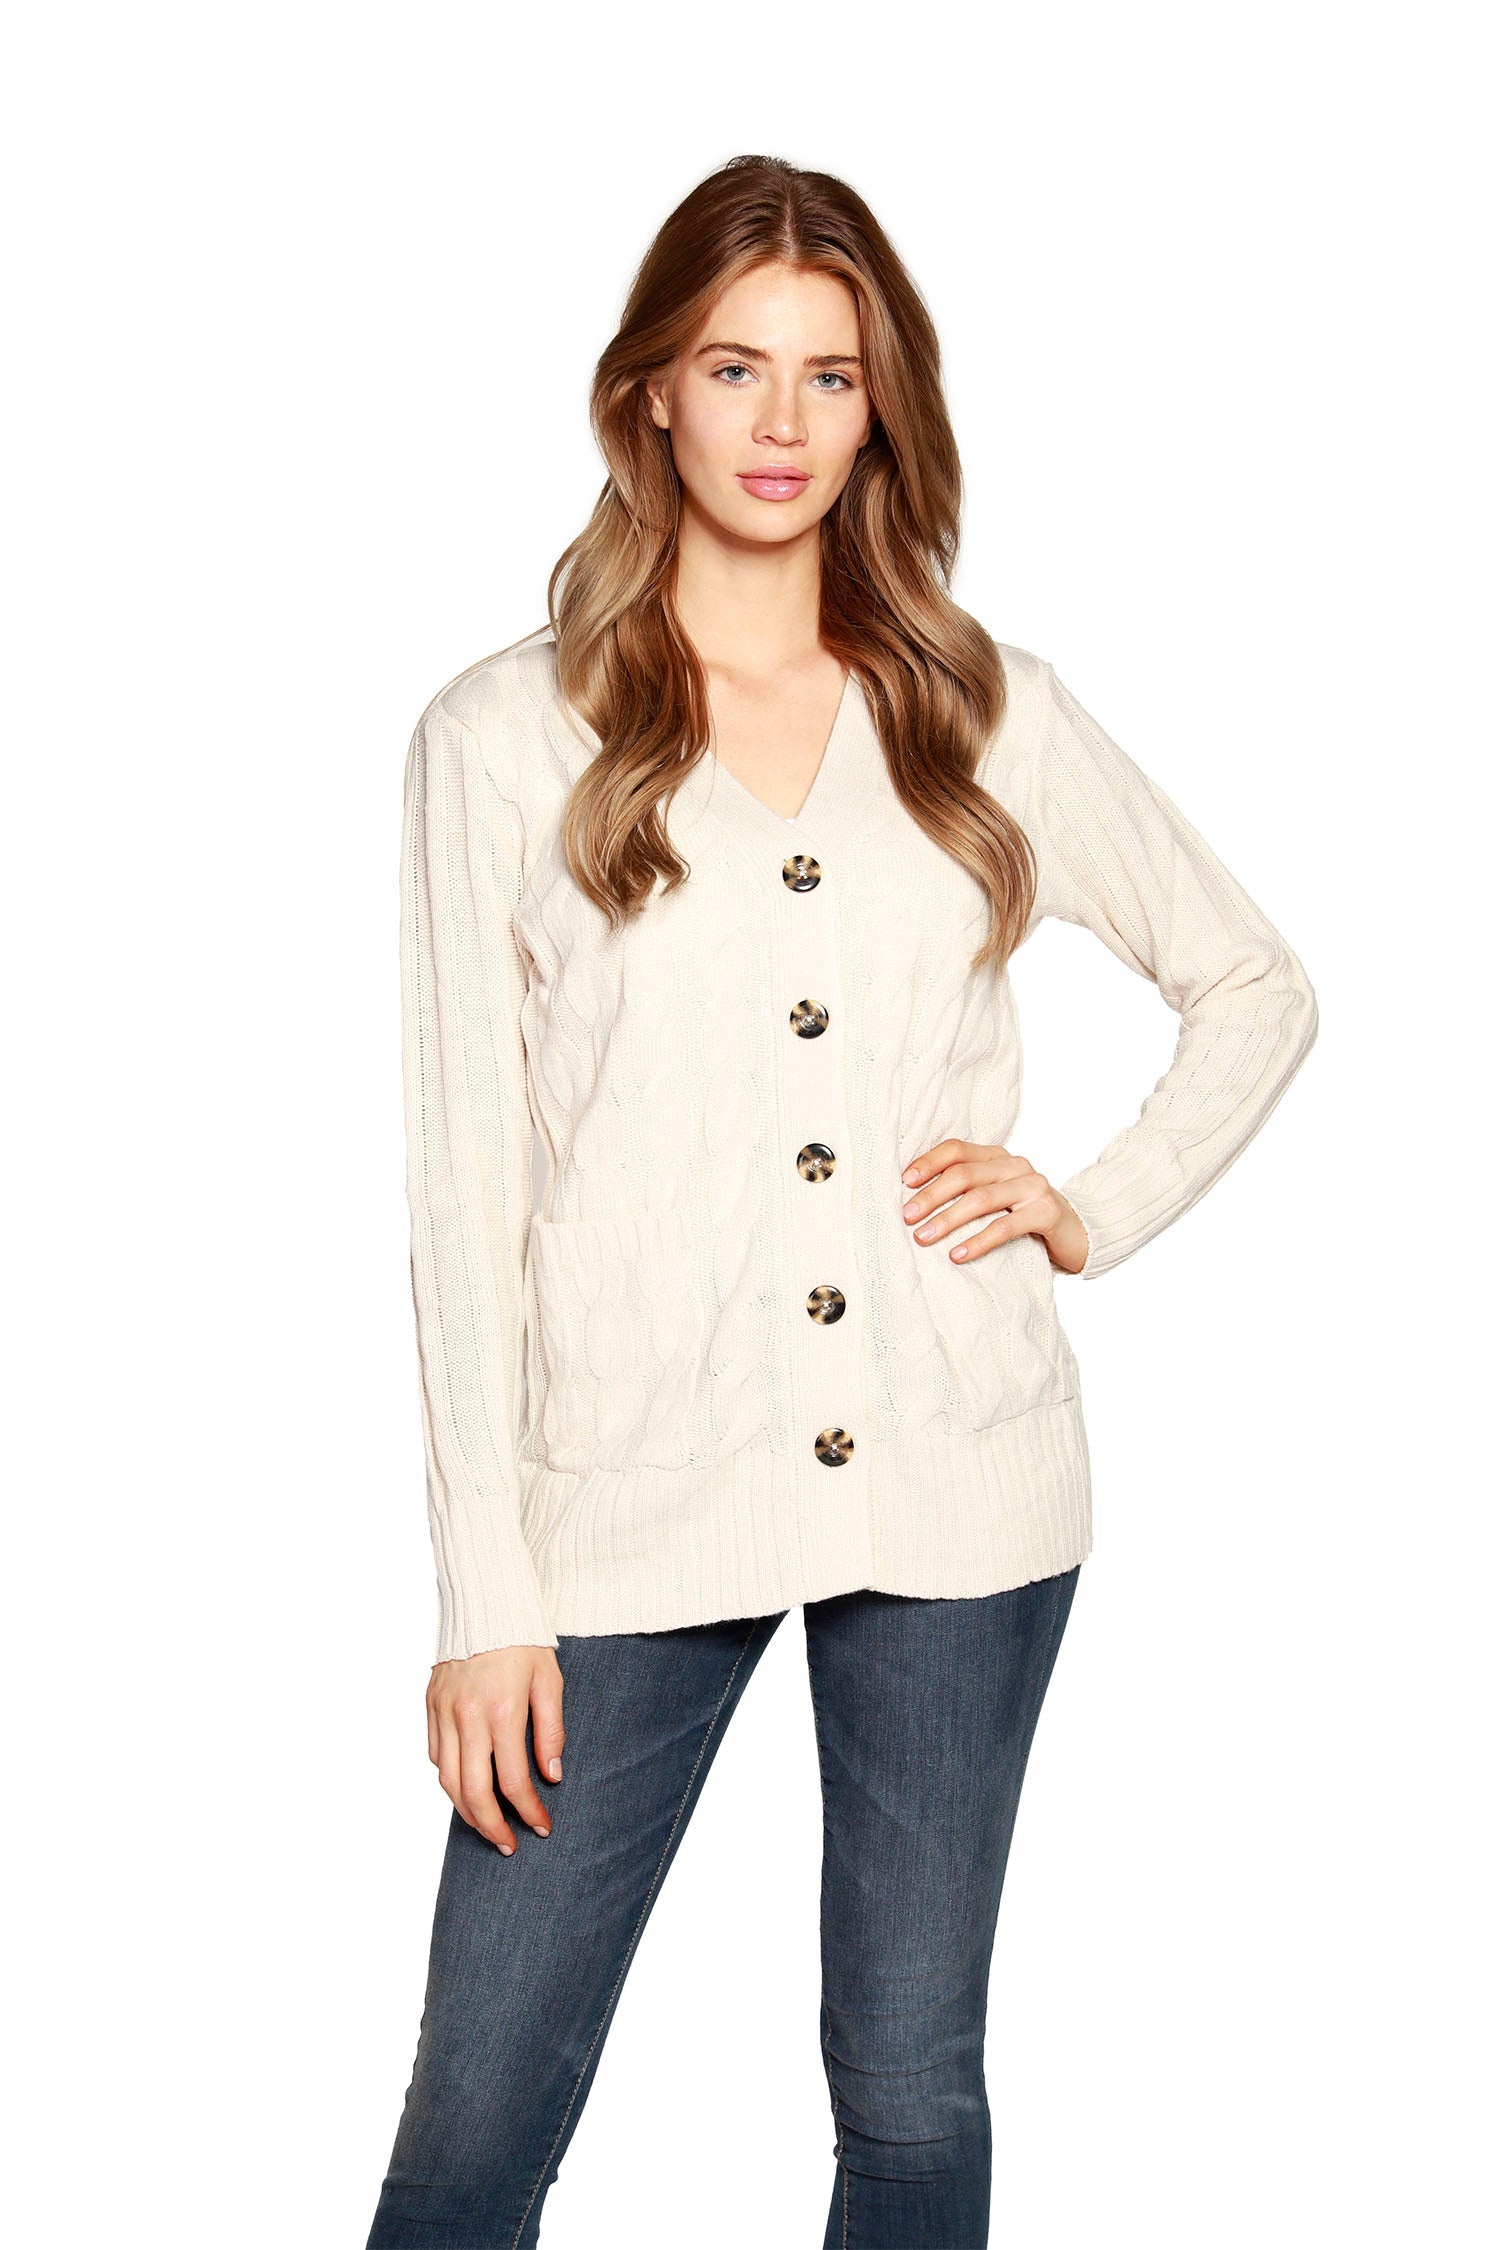 Women's Boyfriend Cardigan Button Front Cable Knit Sweater with Pockets